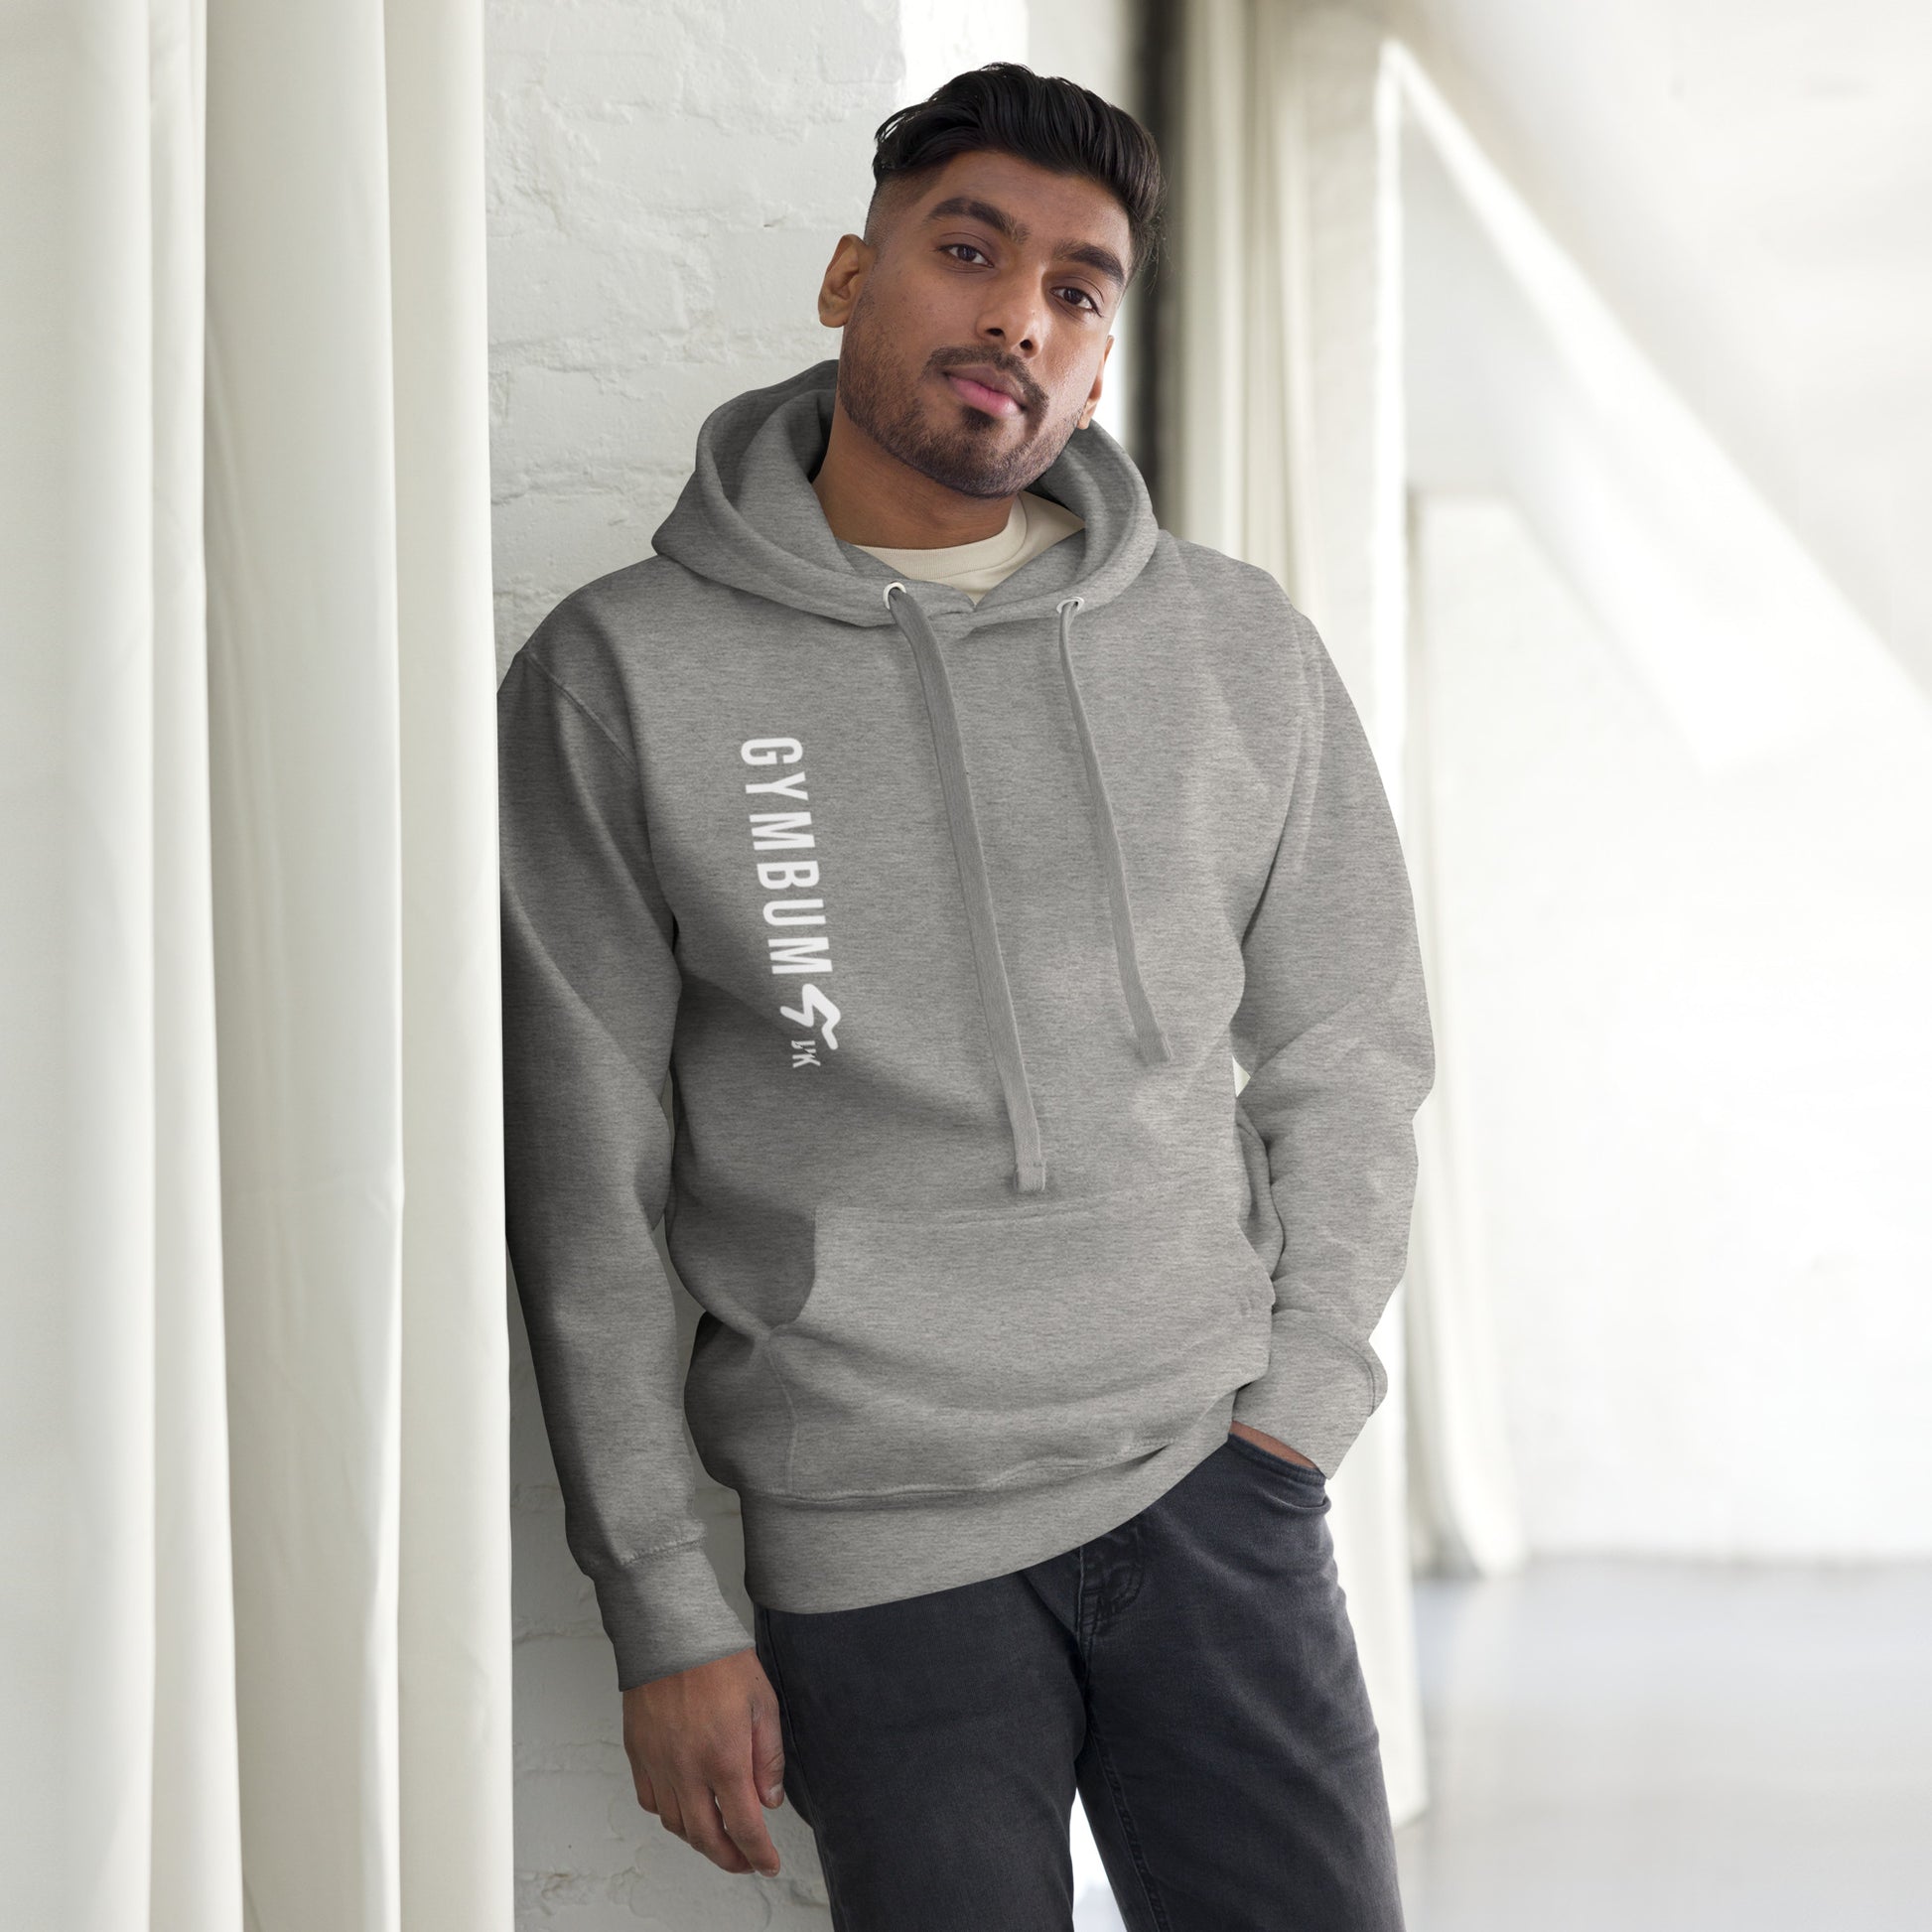 The GymbumUK Long Logo Gender Neutral Pullover Hooded top